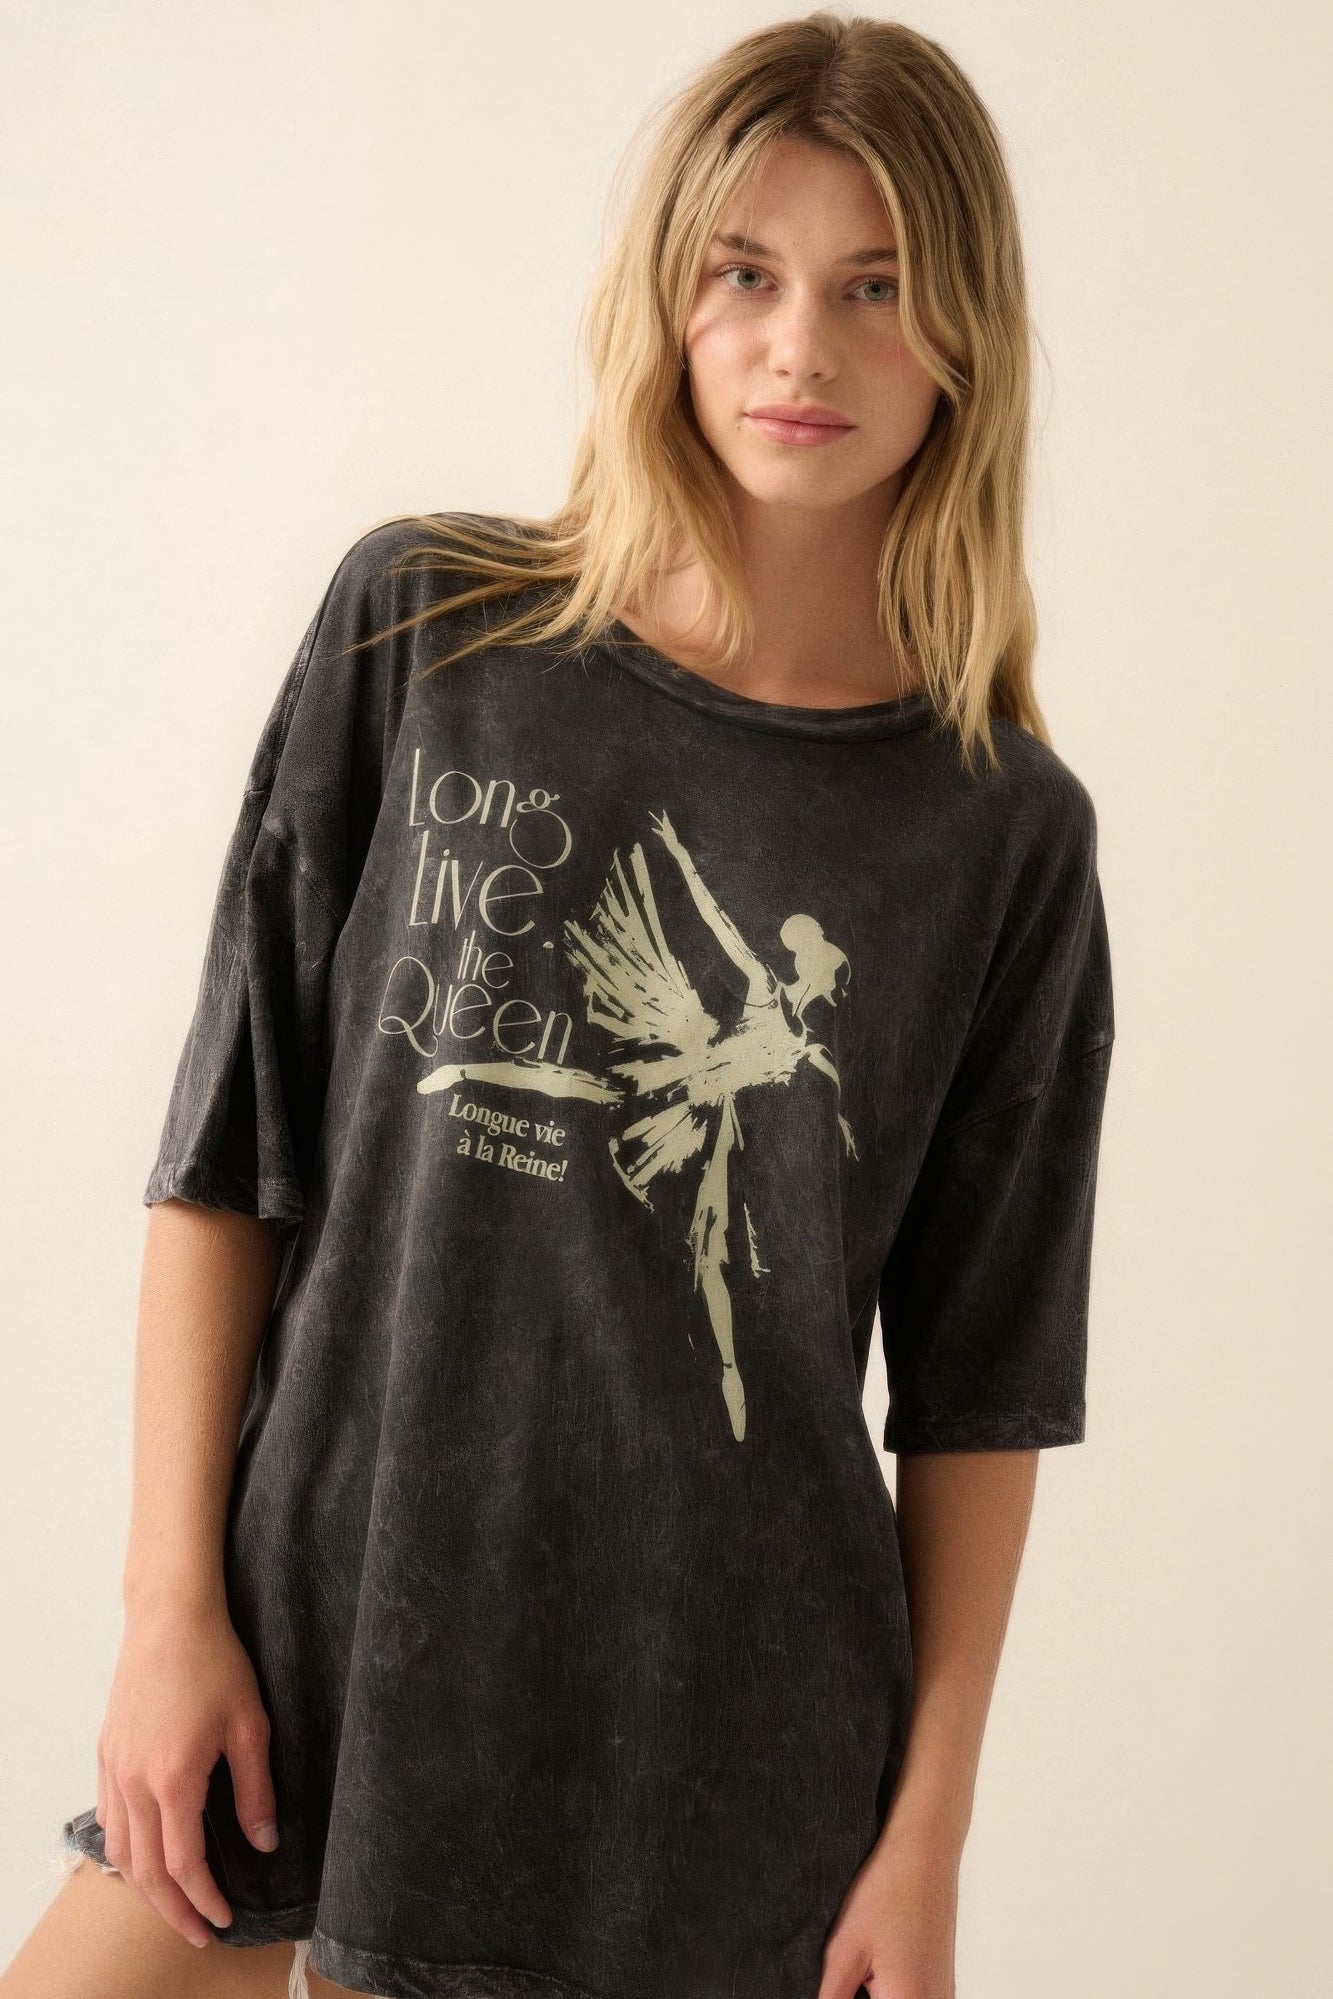 Blue Zone Planet |  Long Live The Queen Ballerina Graphic Tee Blue Zone Planet